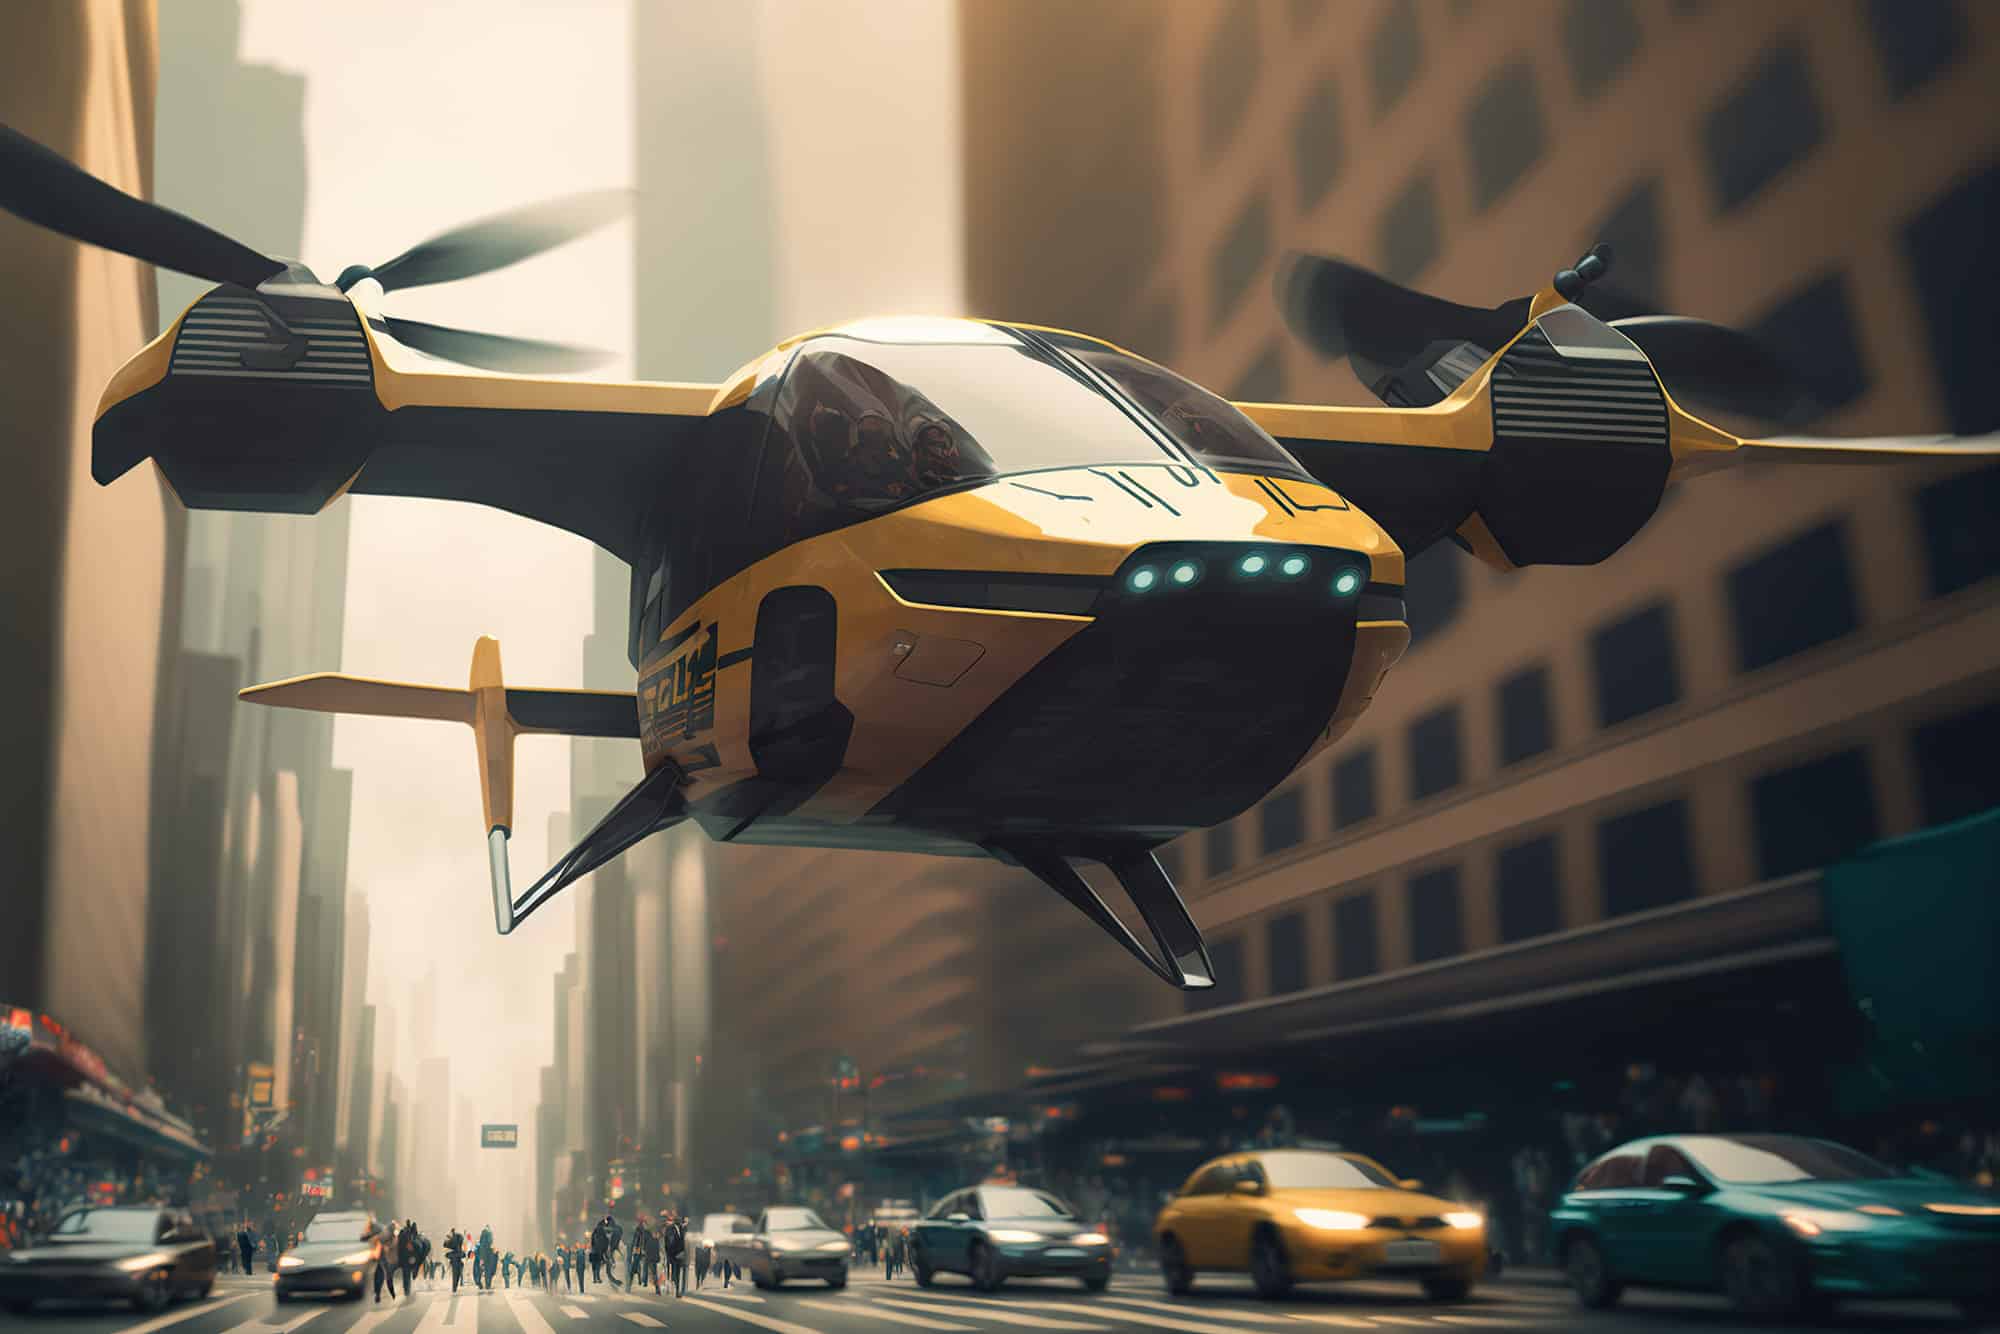 Realistic illustration of a futuristic, flying taxi cab in the city